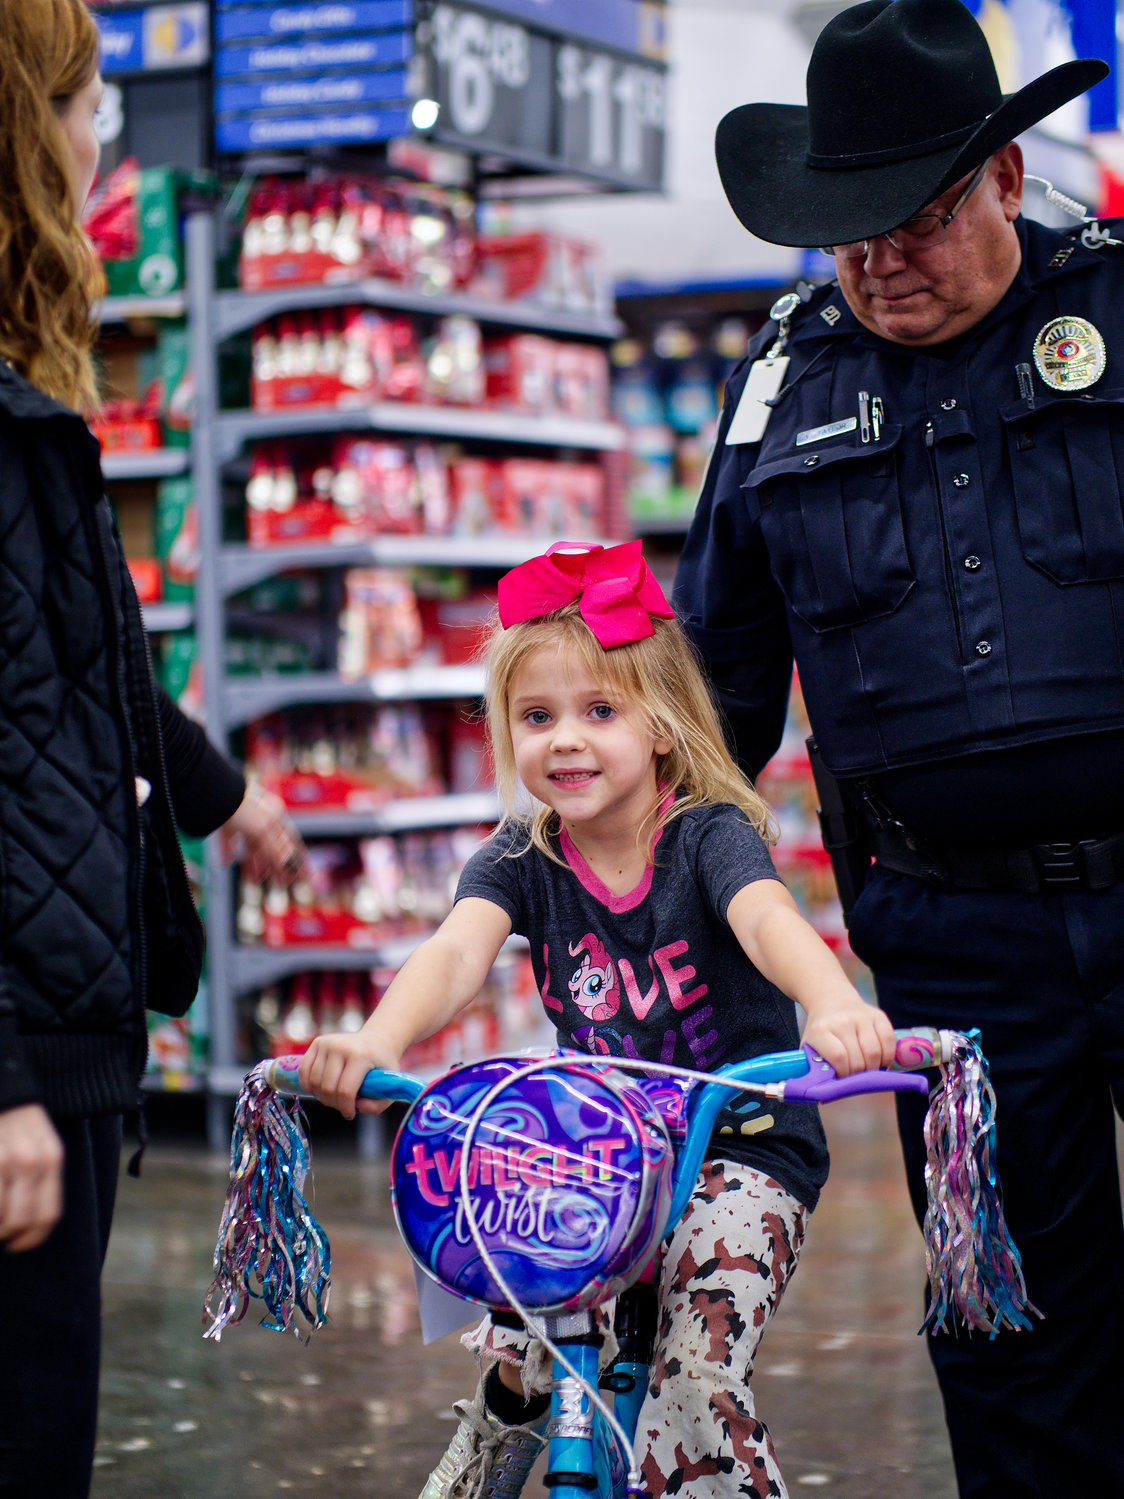 Quitman Police Dept. officer Victor Taylor follows biker Kayleigh Southard to the checkout with her chosen item, already getting in some practice.